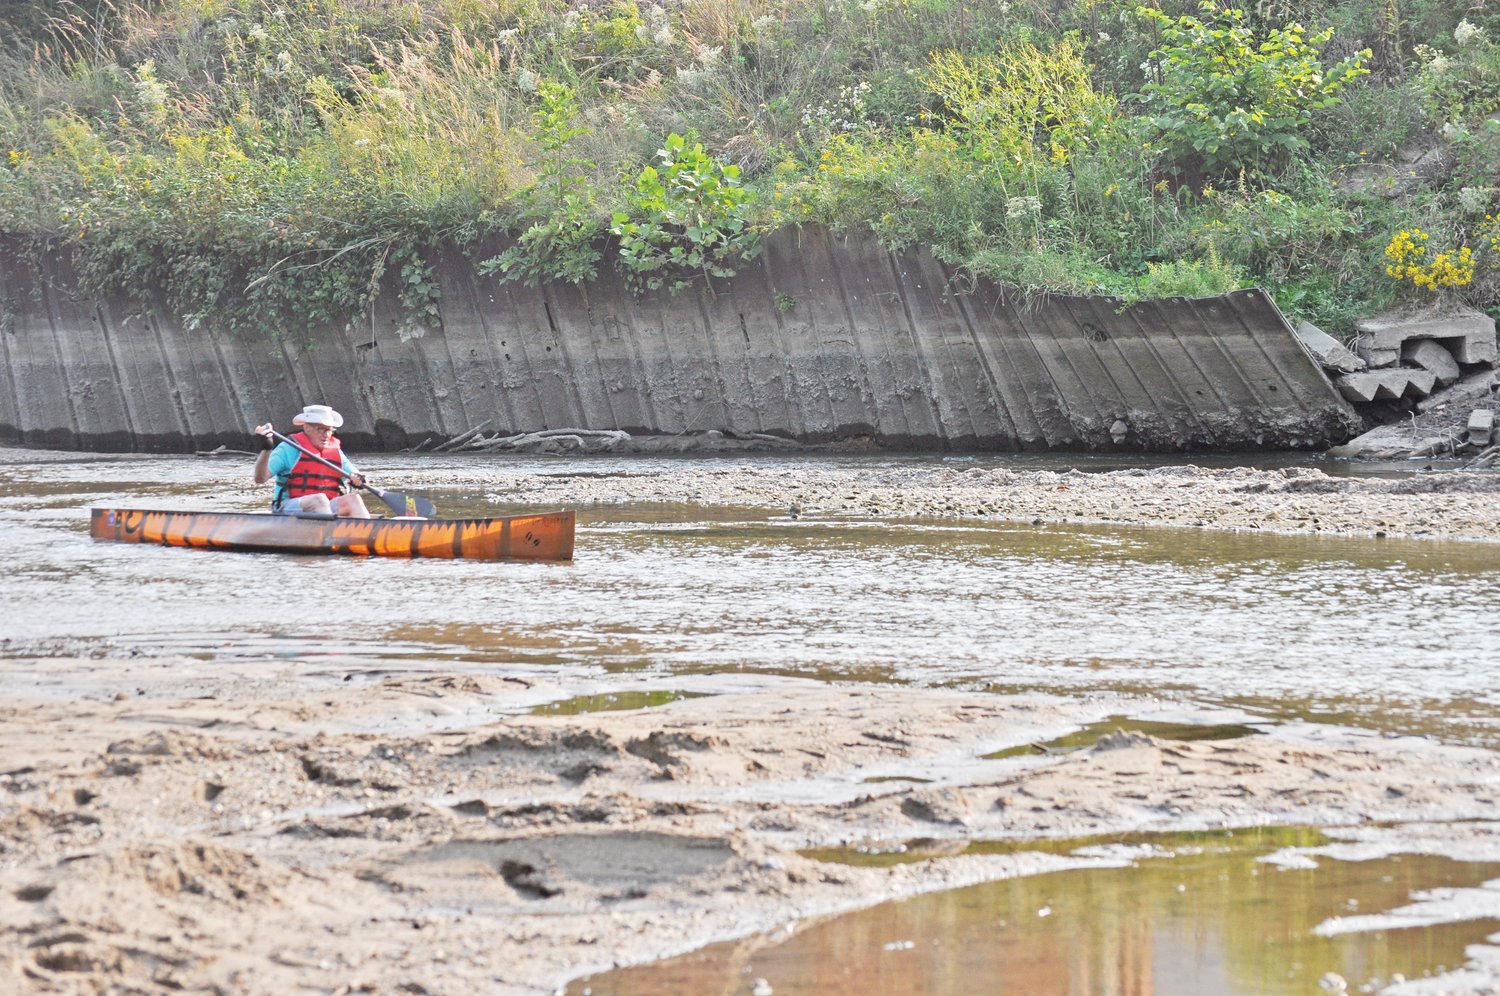 Bob Stwalley paddles through the old lowhead dam site on Sugar Creek on Monday.